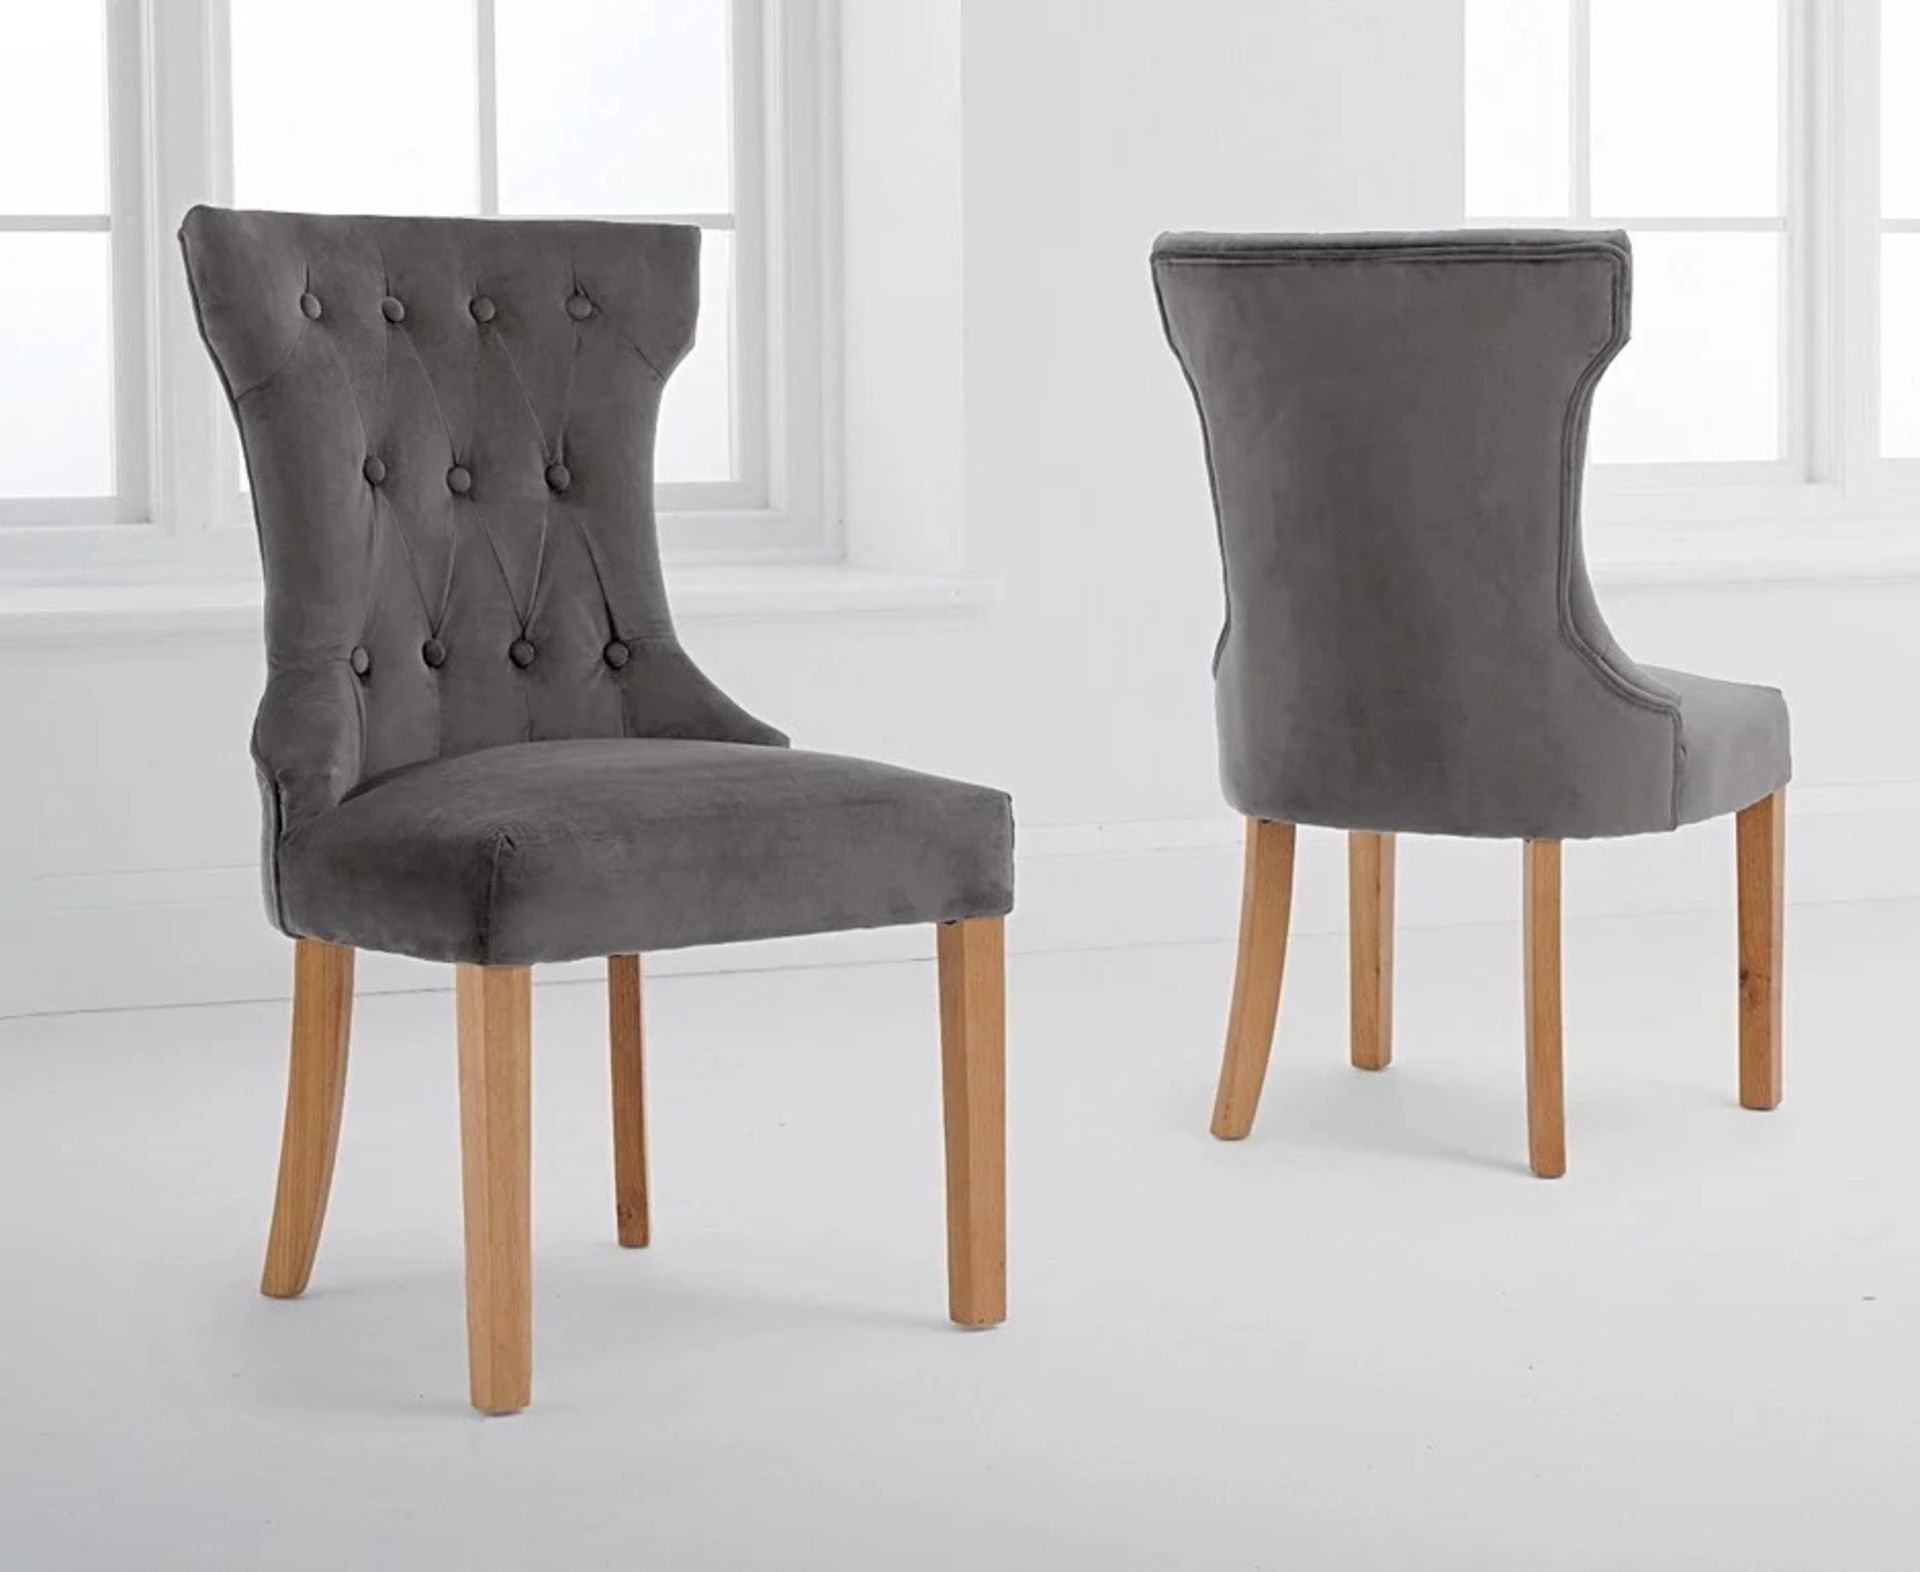 Camille Grey Velvet Chair The Camille collection exudes high-end style, worthy of any fashionable